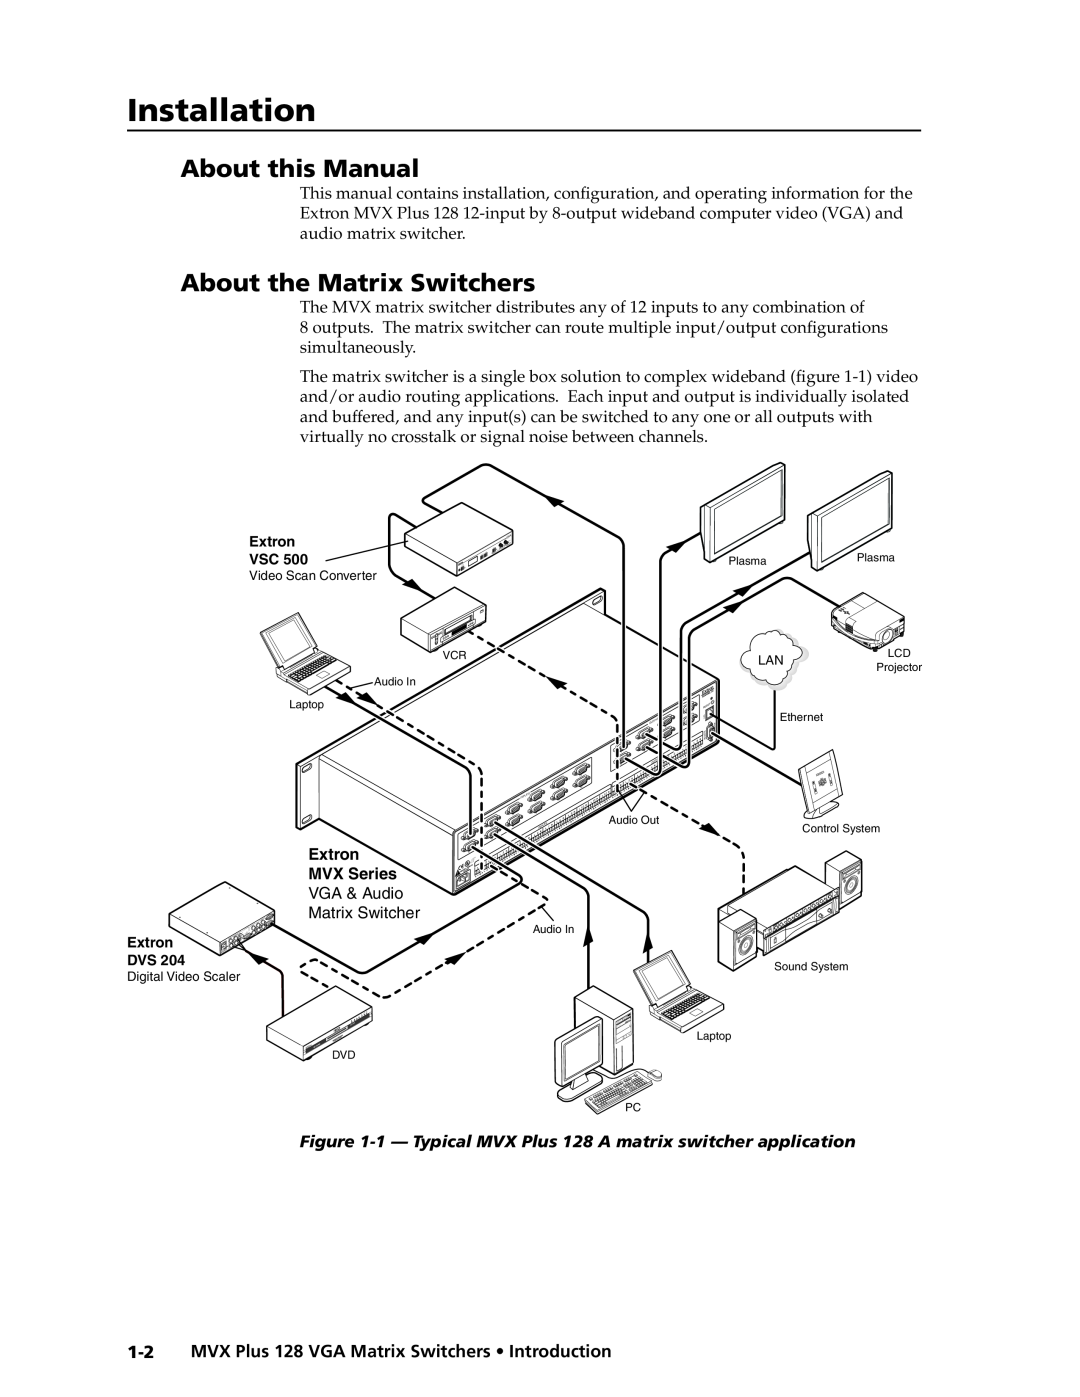 Extron electronic MVX PLUS 128 manual Installation, About this Manual, About the Matrix Switchers 